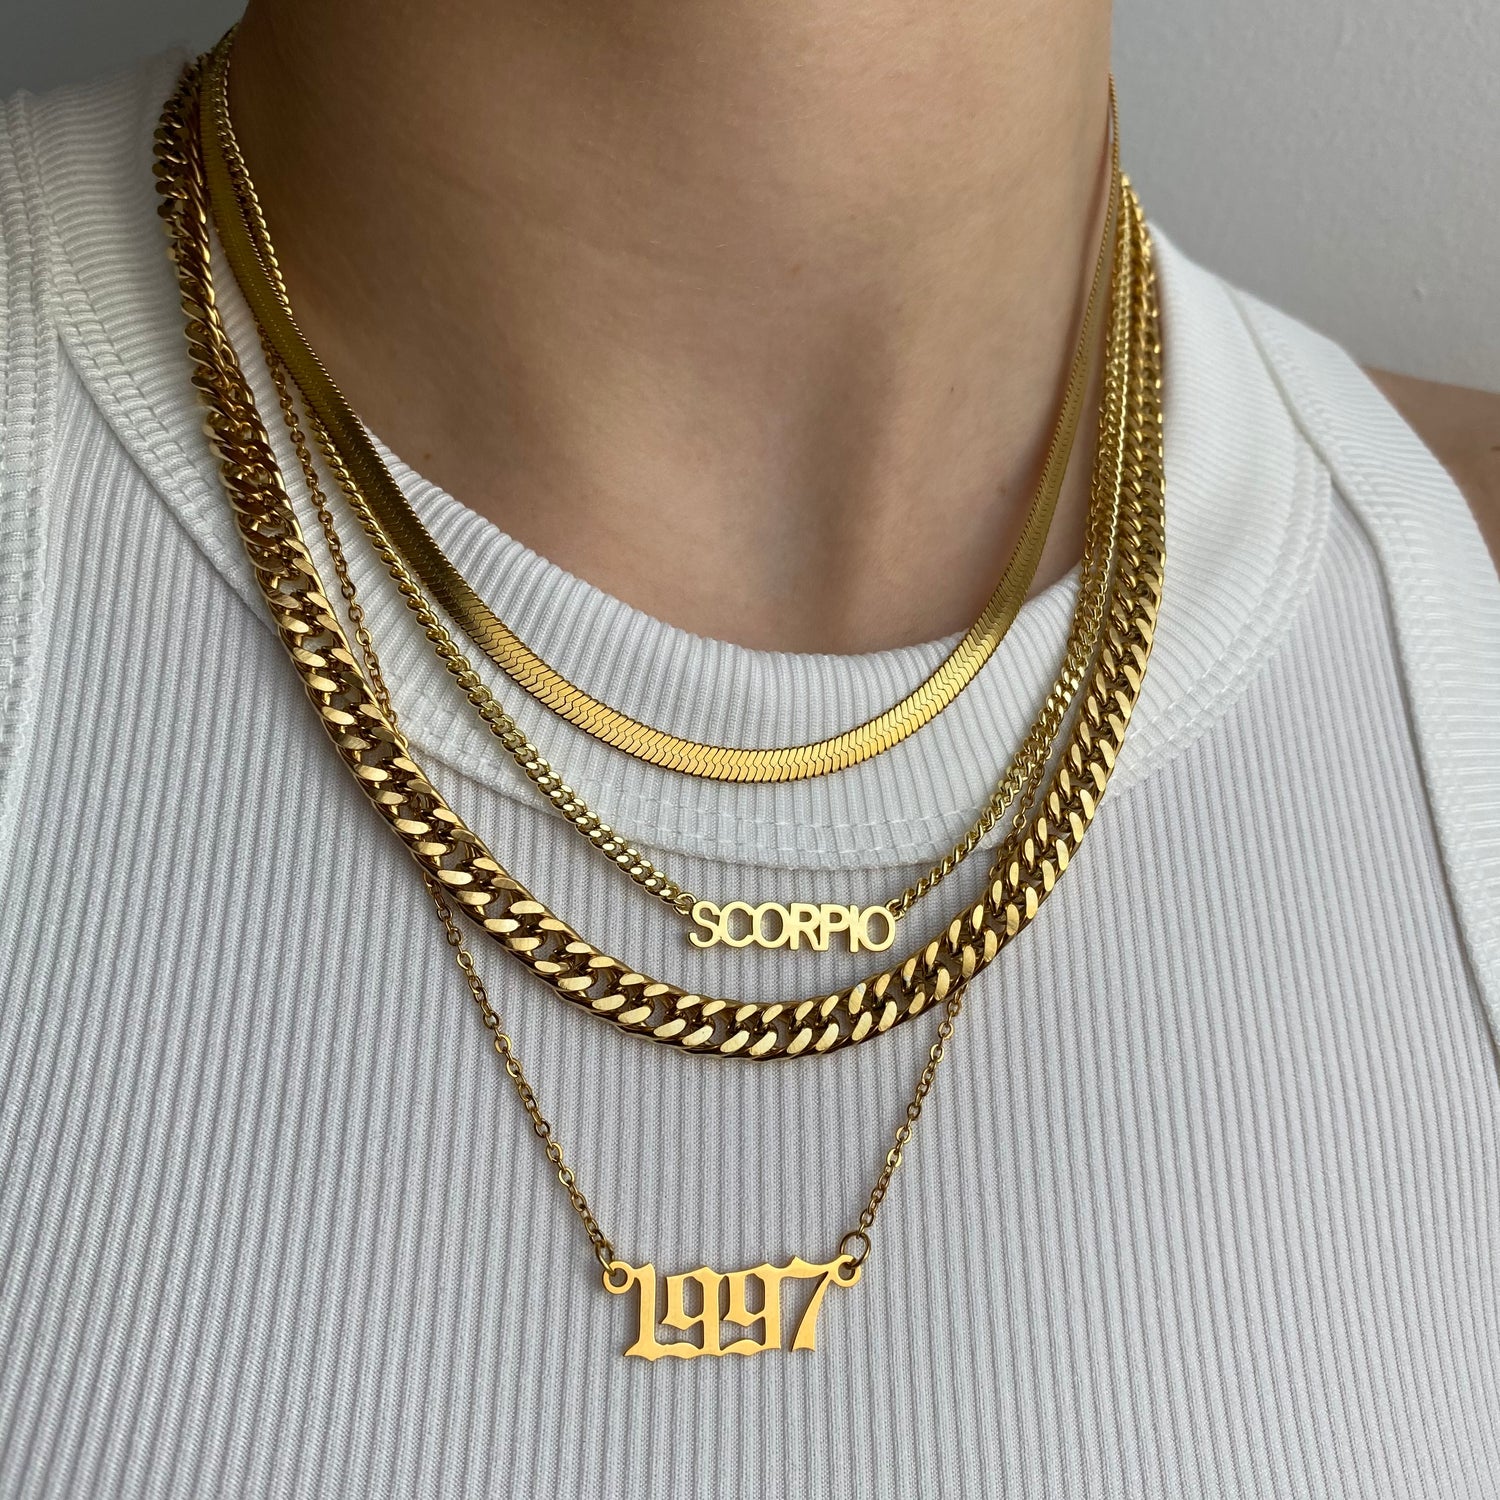 Golden Year Necklace (1995-2007)